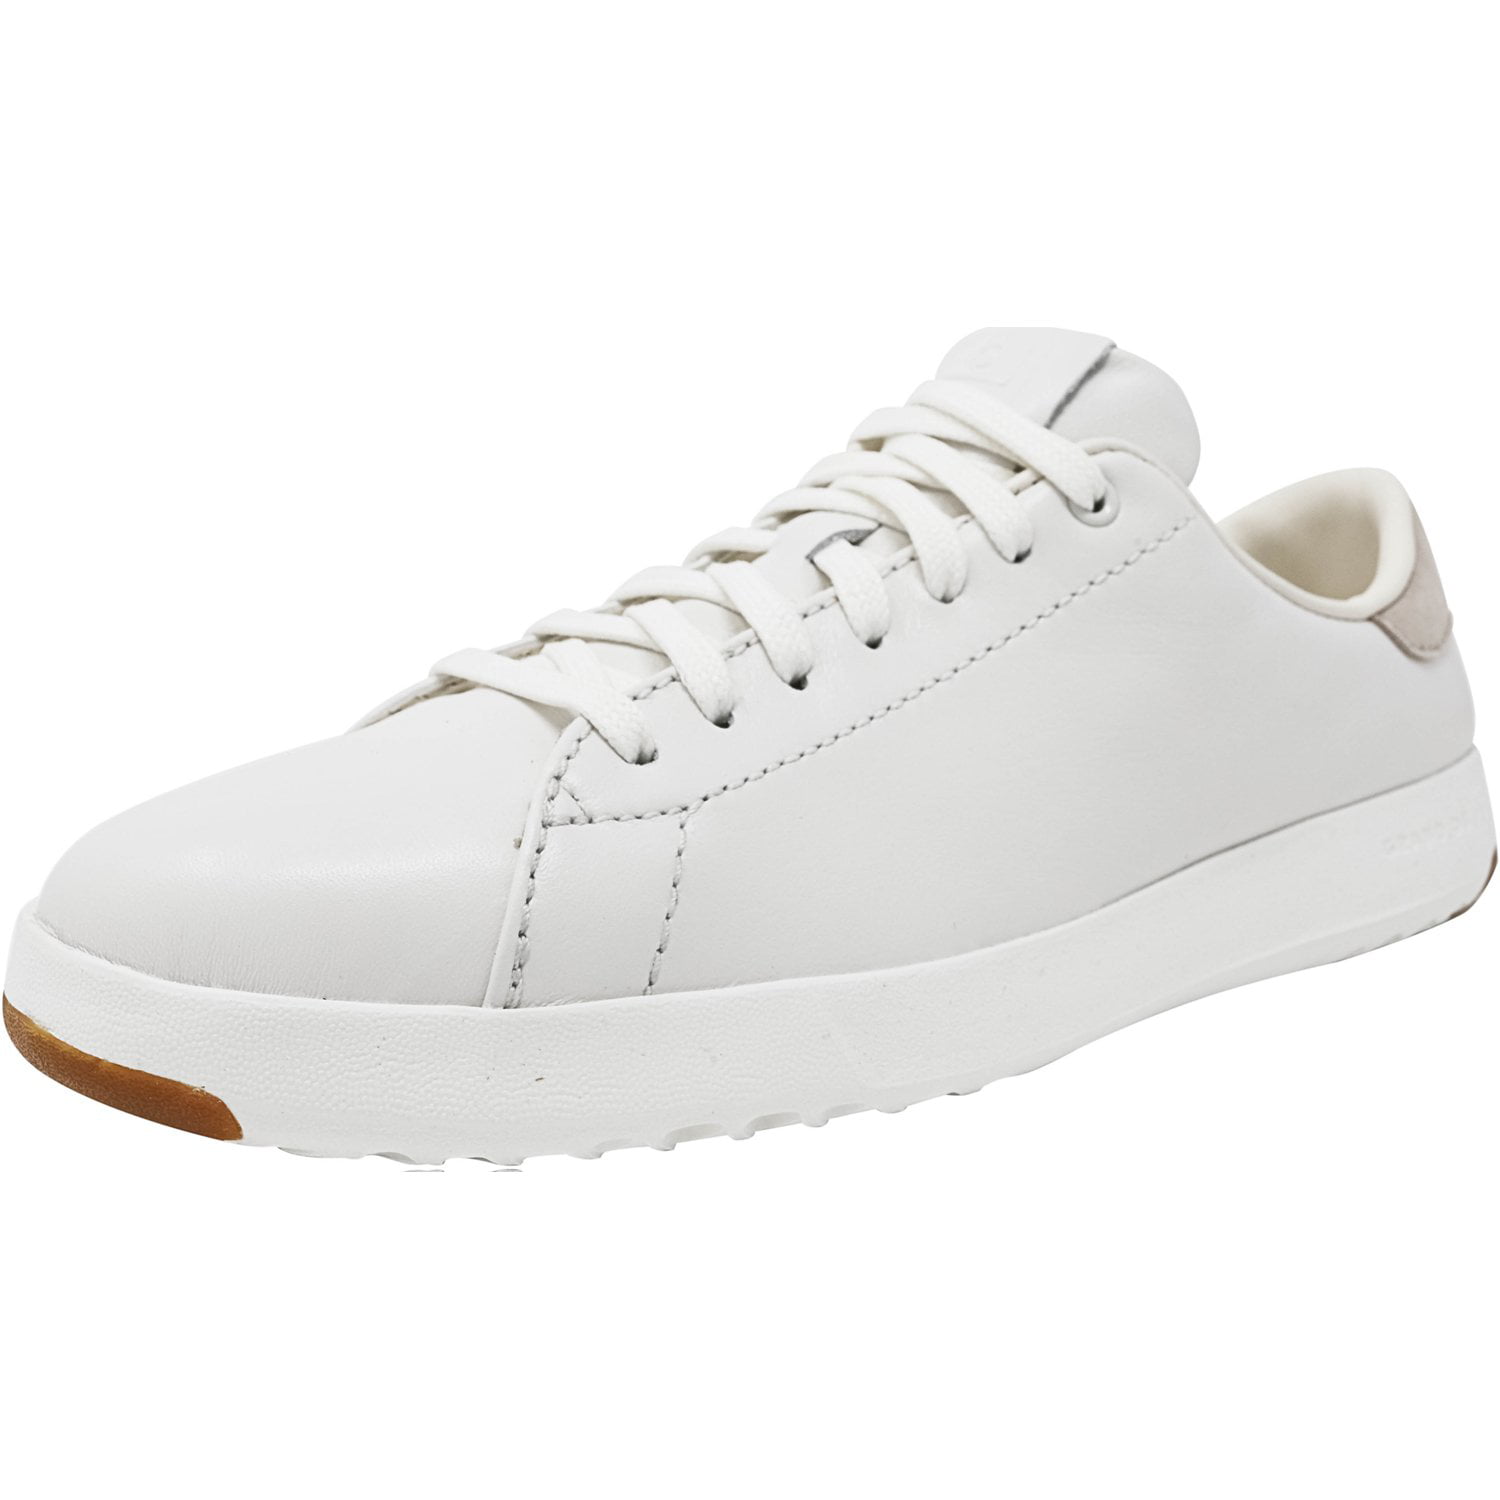 Cole Haan Women's Grandpro Tennis Optic White / Ankle-High Leather ...